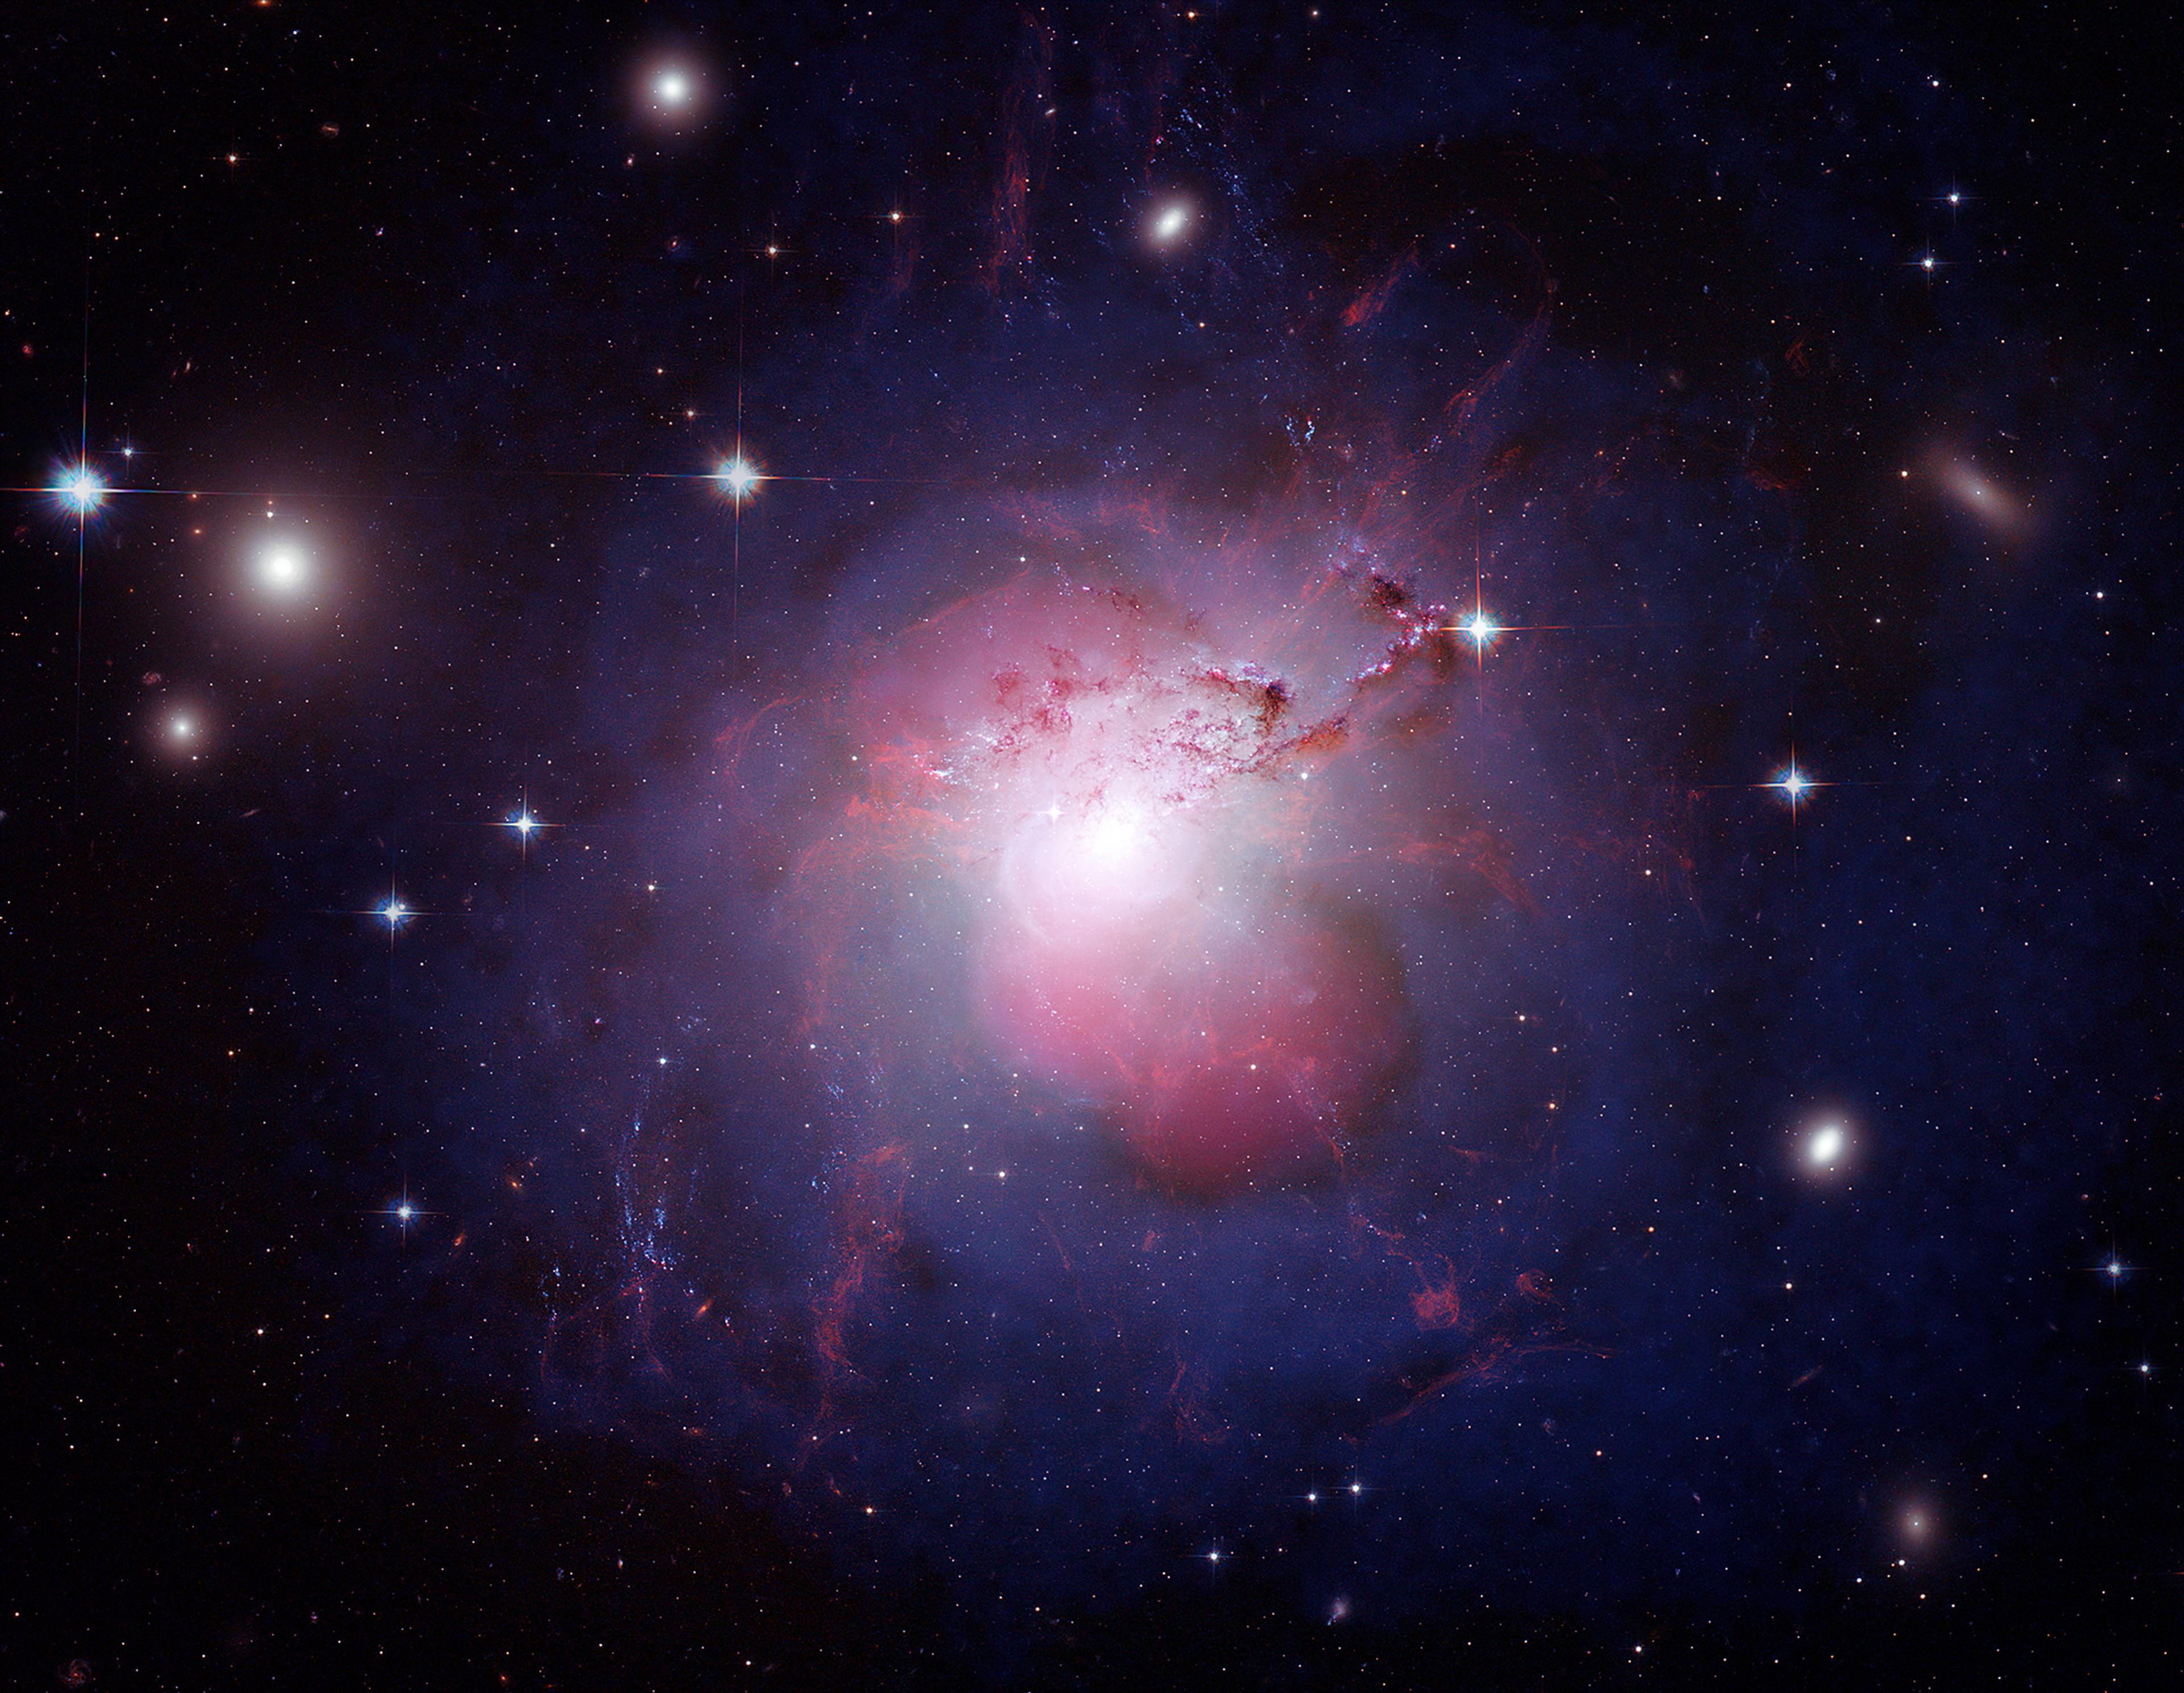 The active galaxy NGC 1275 is a well-known radio source (Perseus A) and a strong emitter of X-rays due to the presence of a black hole in the center of the galaxy. Credit: X-ray: NASA/CXC/IoA/A.Fabian et al.; Radio: NRAO/VLA/G. Taylor; Optical: NASA/ESA/Hubble Heritage (STScI/AURA) & Univ. of Cambridge/IoA/A. Fabian 